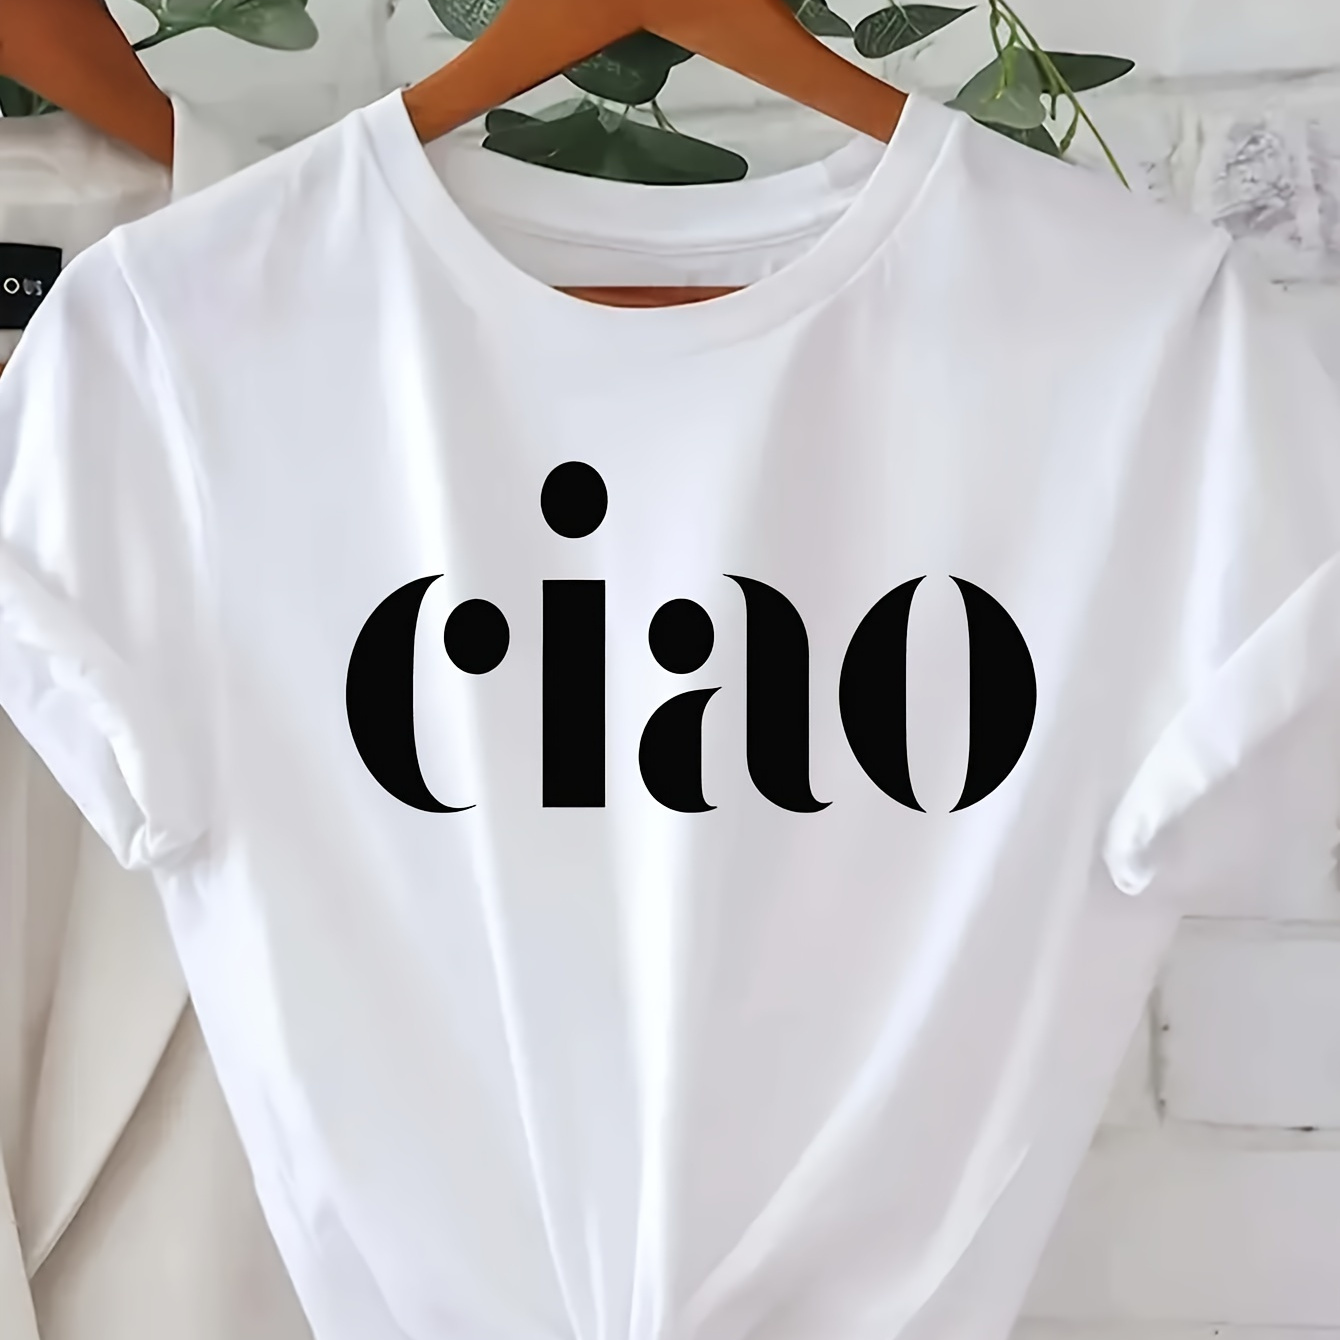 

Ciao Letter Print Crew Neck T-shirt, Casual Short Sleeve Top For Spring & Summer, Women's Clothing